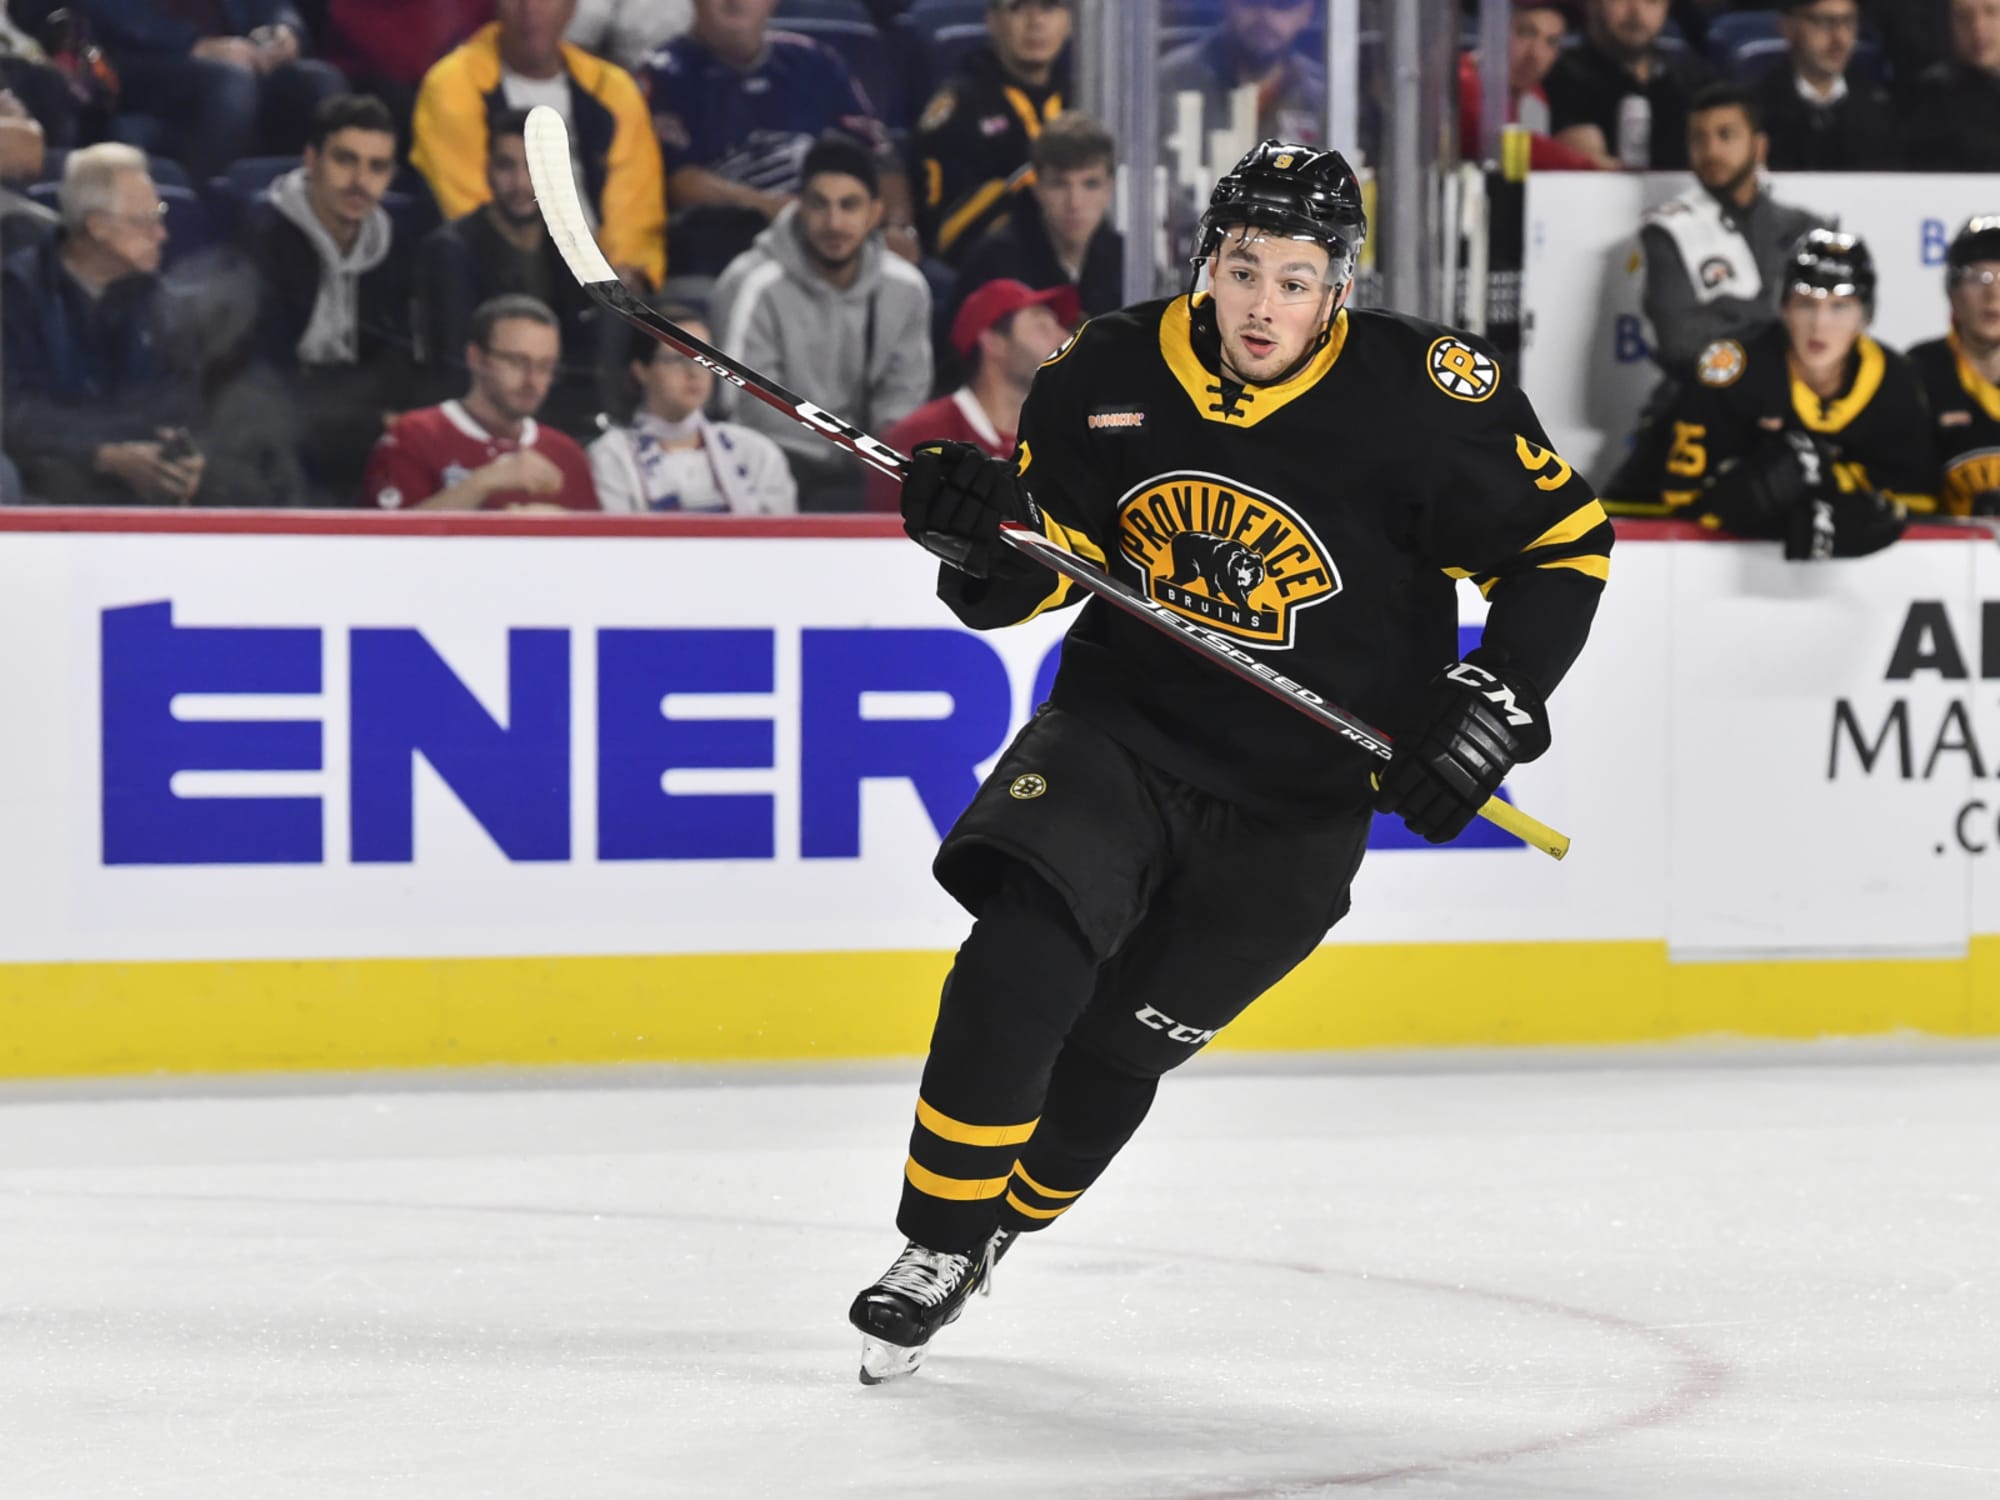 Boston Bruins rookies lead Providence Bruins to another win